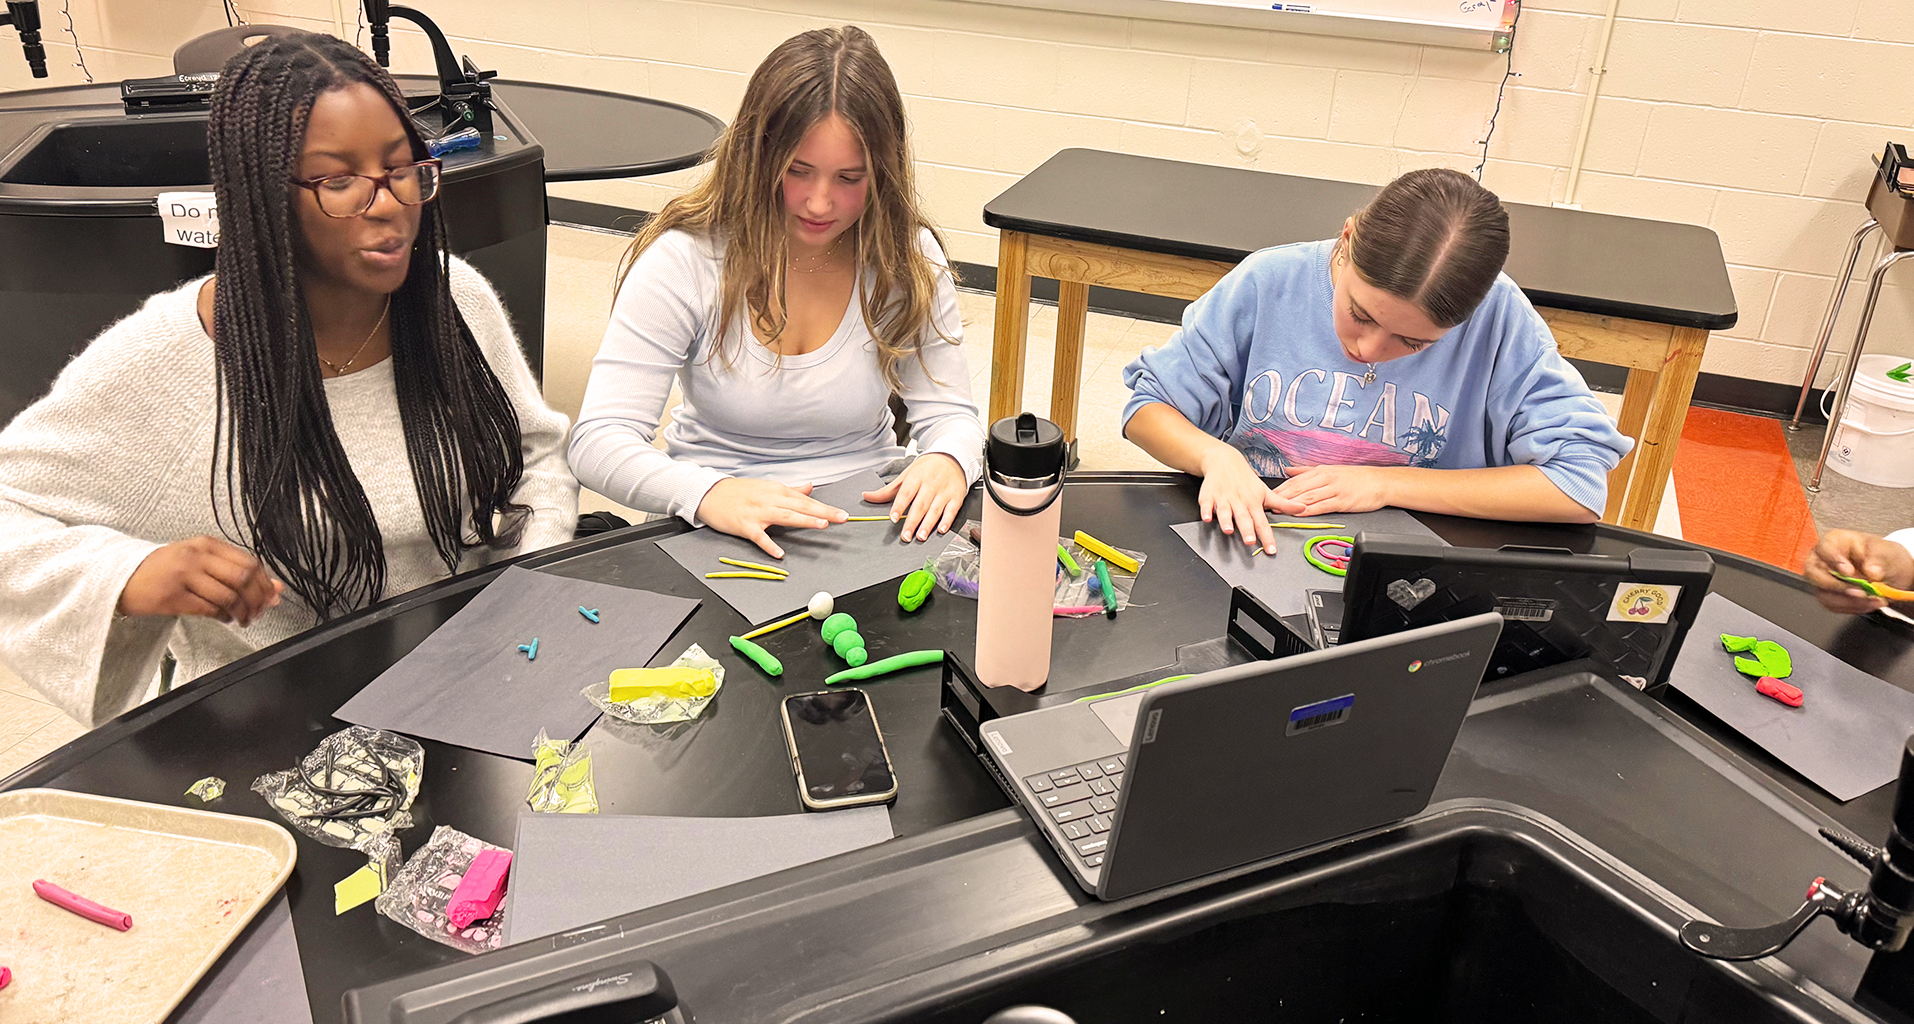 Three students working together on a project in classroom